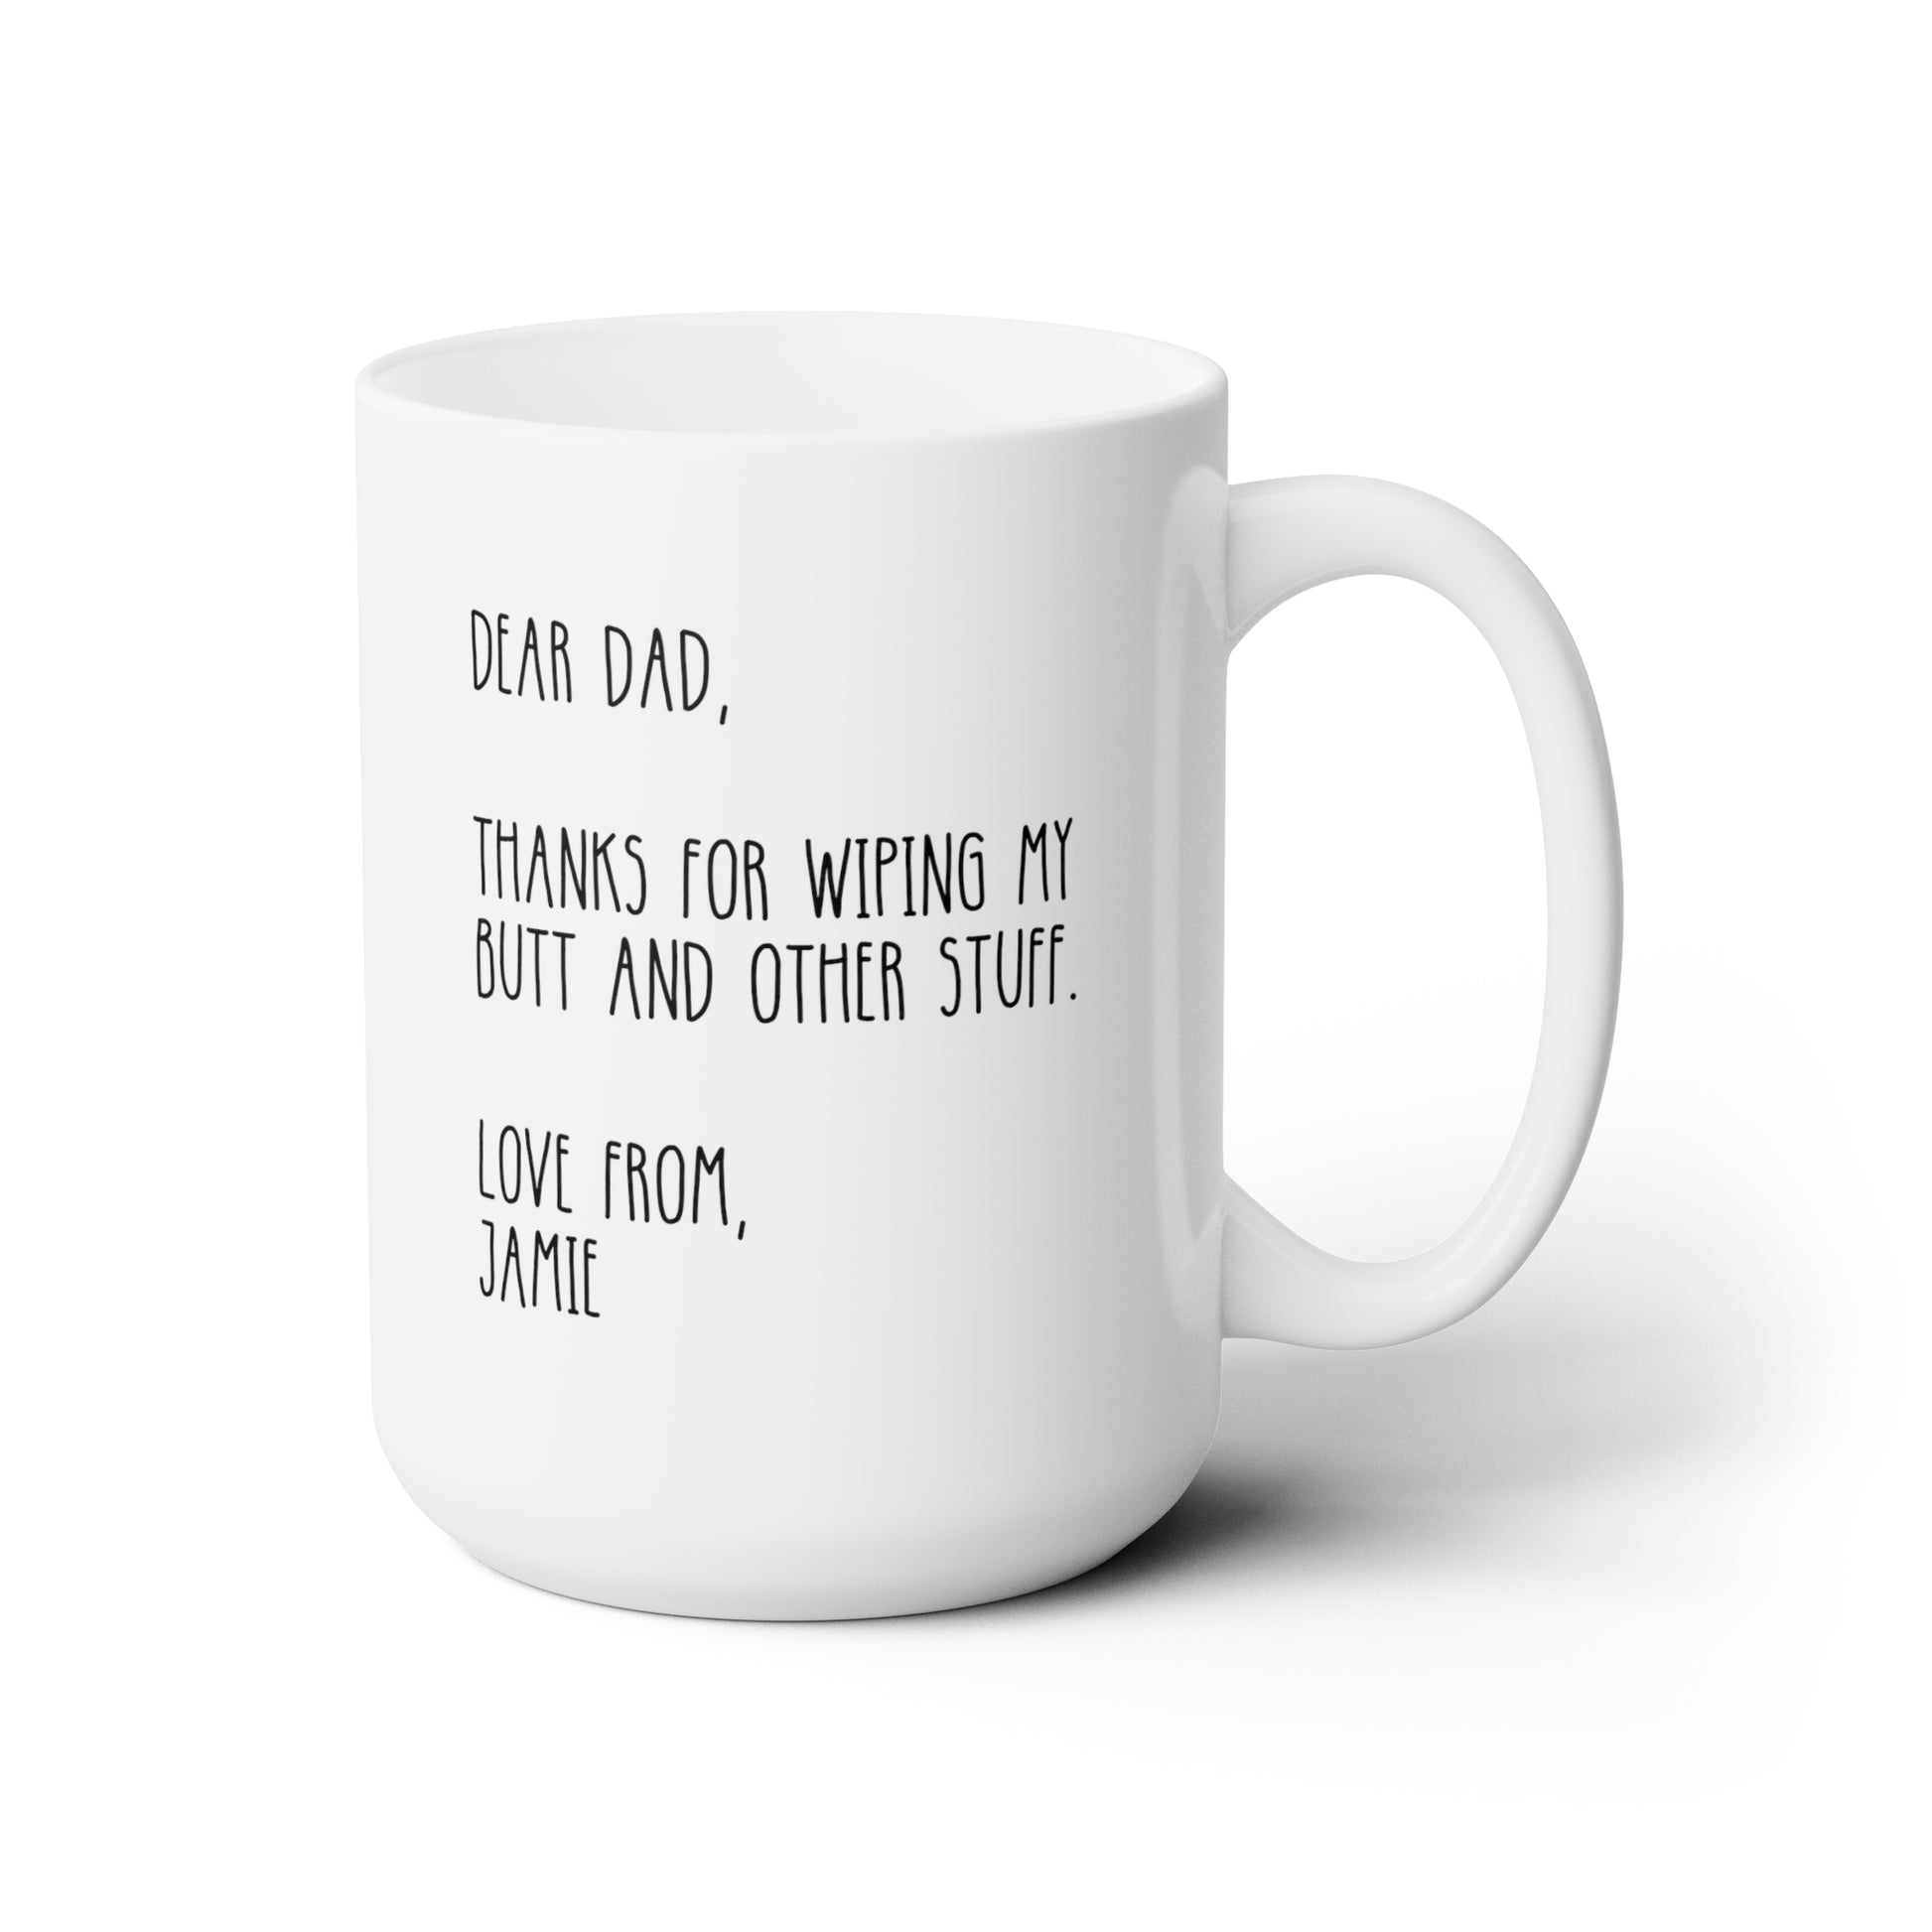 Dear Dad Thanks For Wiping My Butt And Other Stuff 15oz white funny large coffee mug gift for dad fathers day novelty gag papa custom name waveywares wavey wares wavywares wavy wares